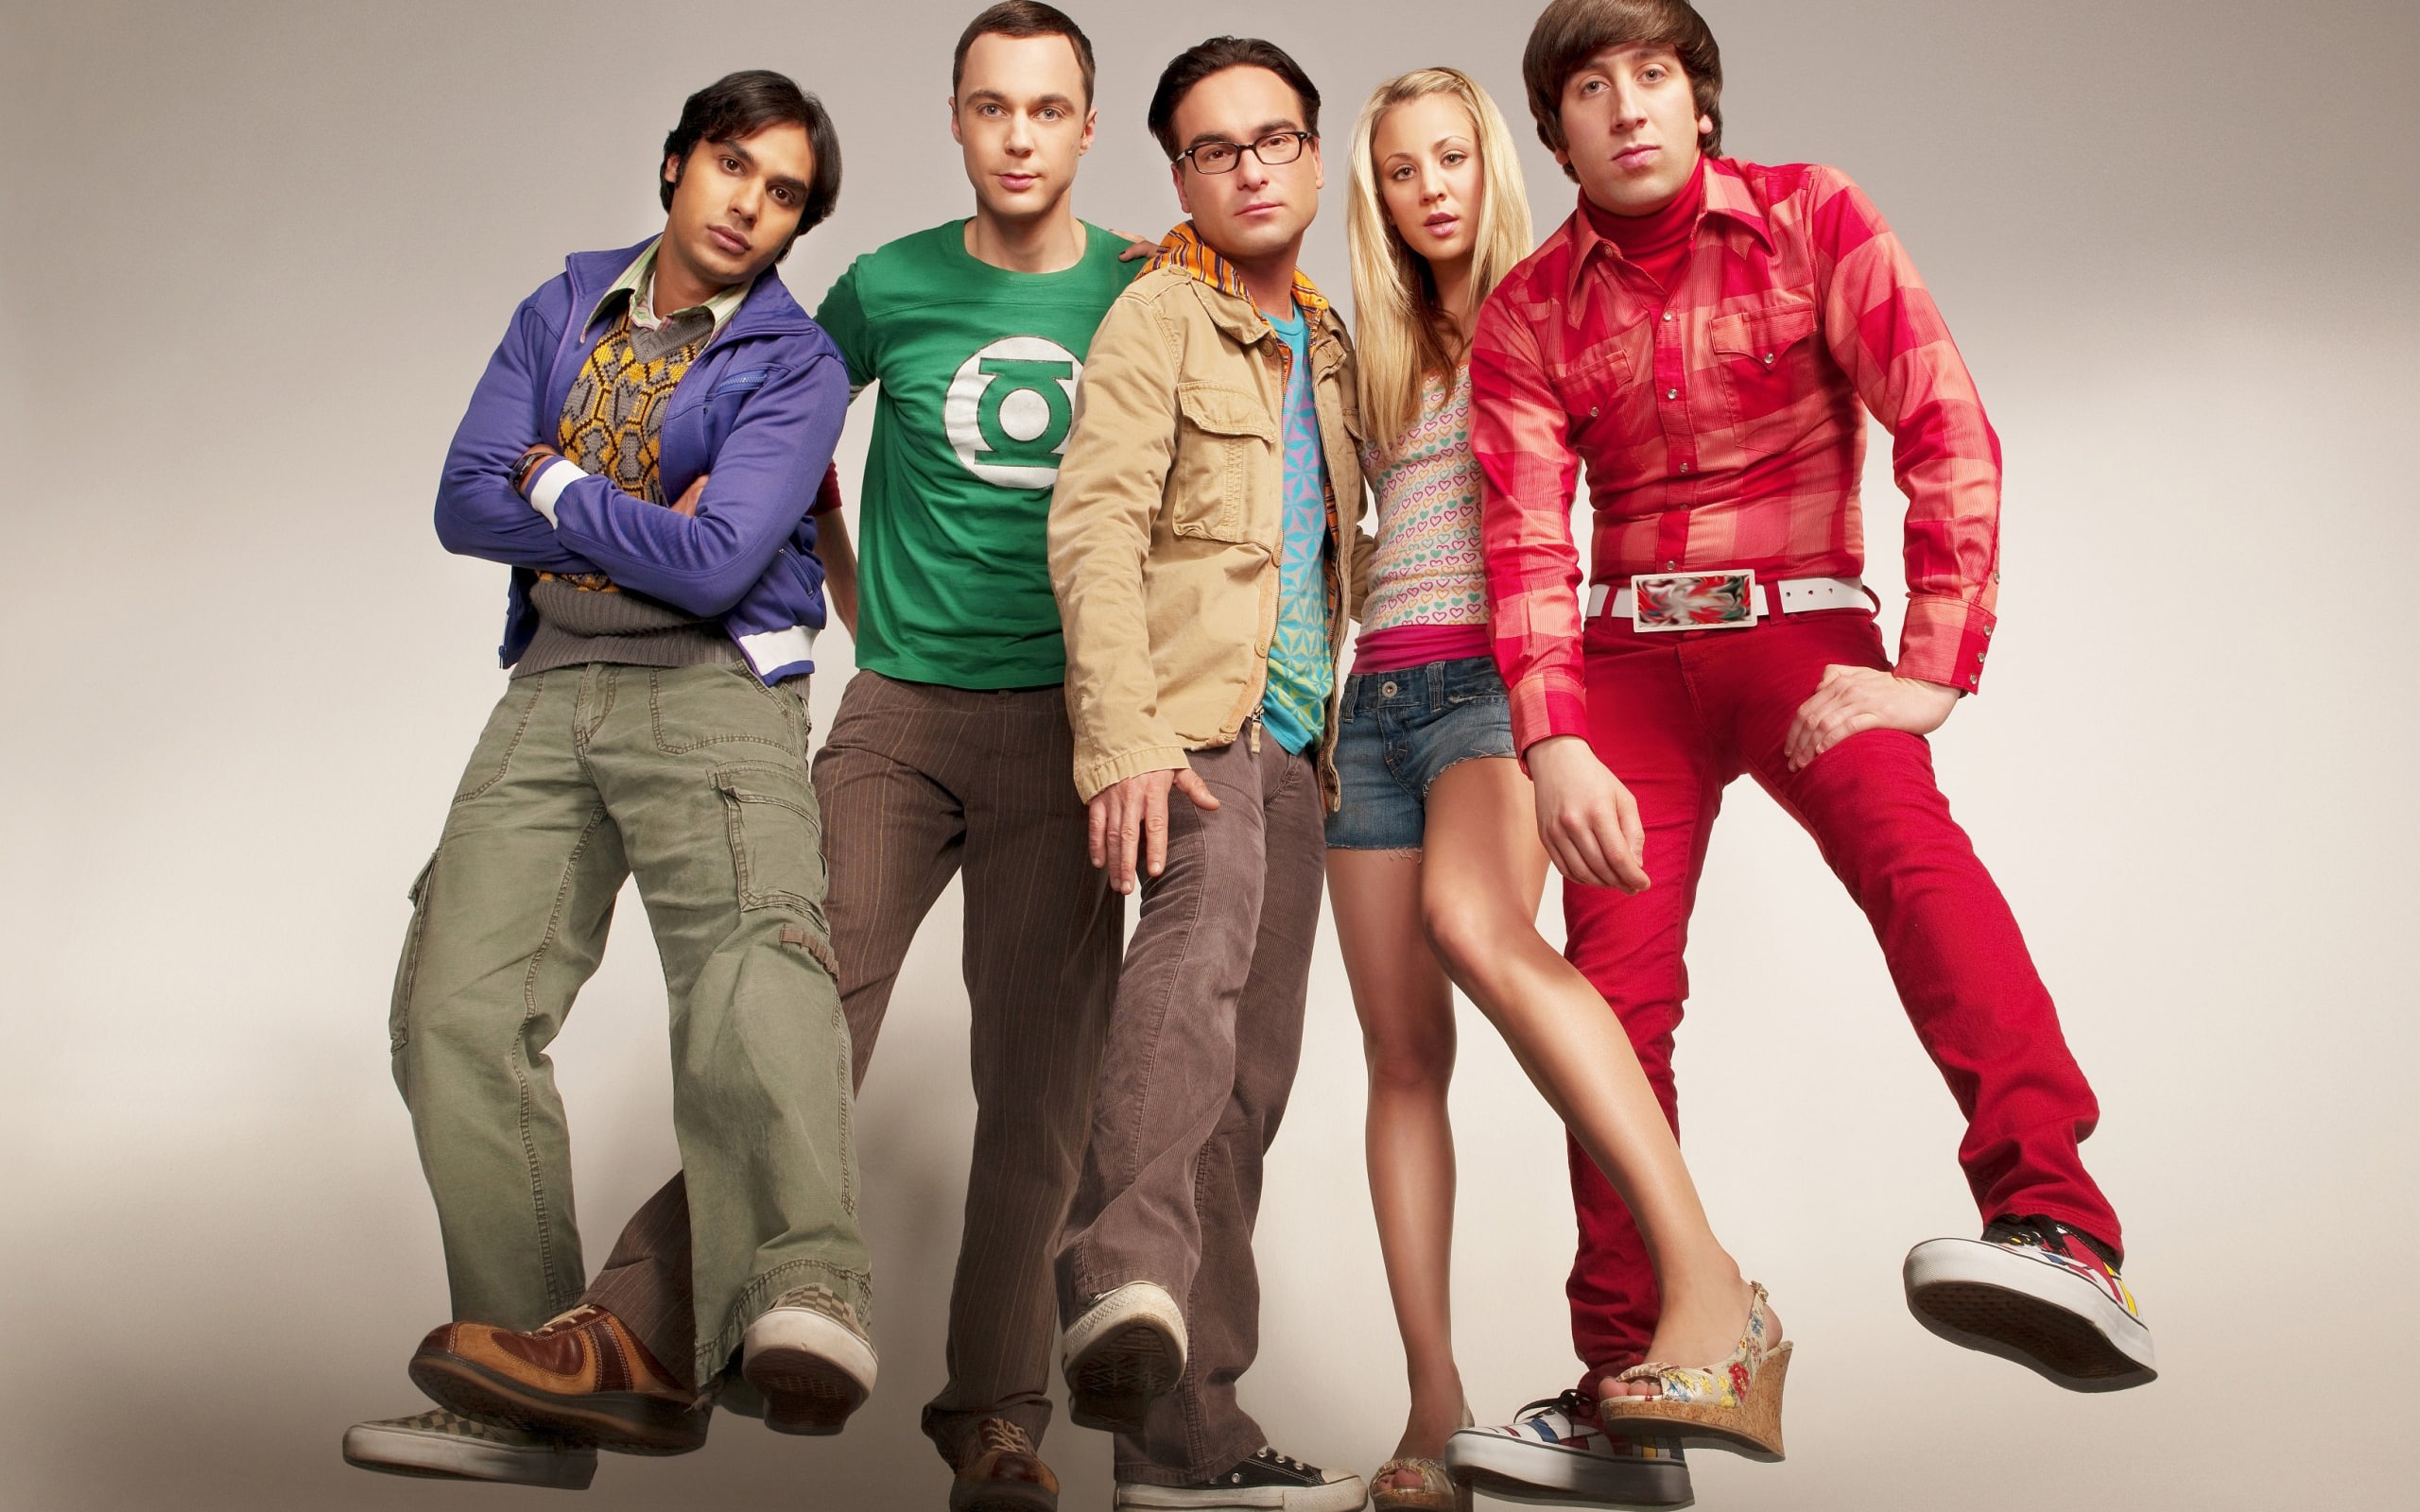 TV Show, The Big Bang Theory, Cast, Howard Wolowitz, Jim Parsons